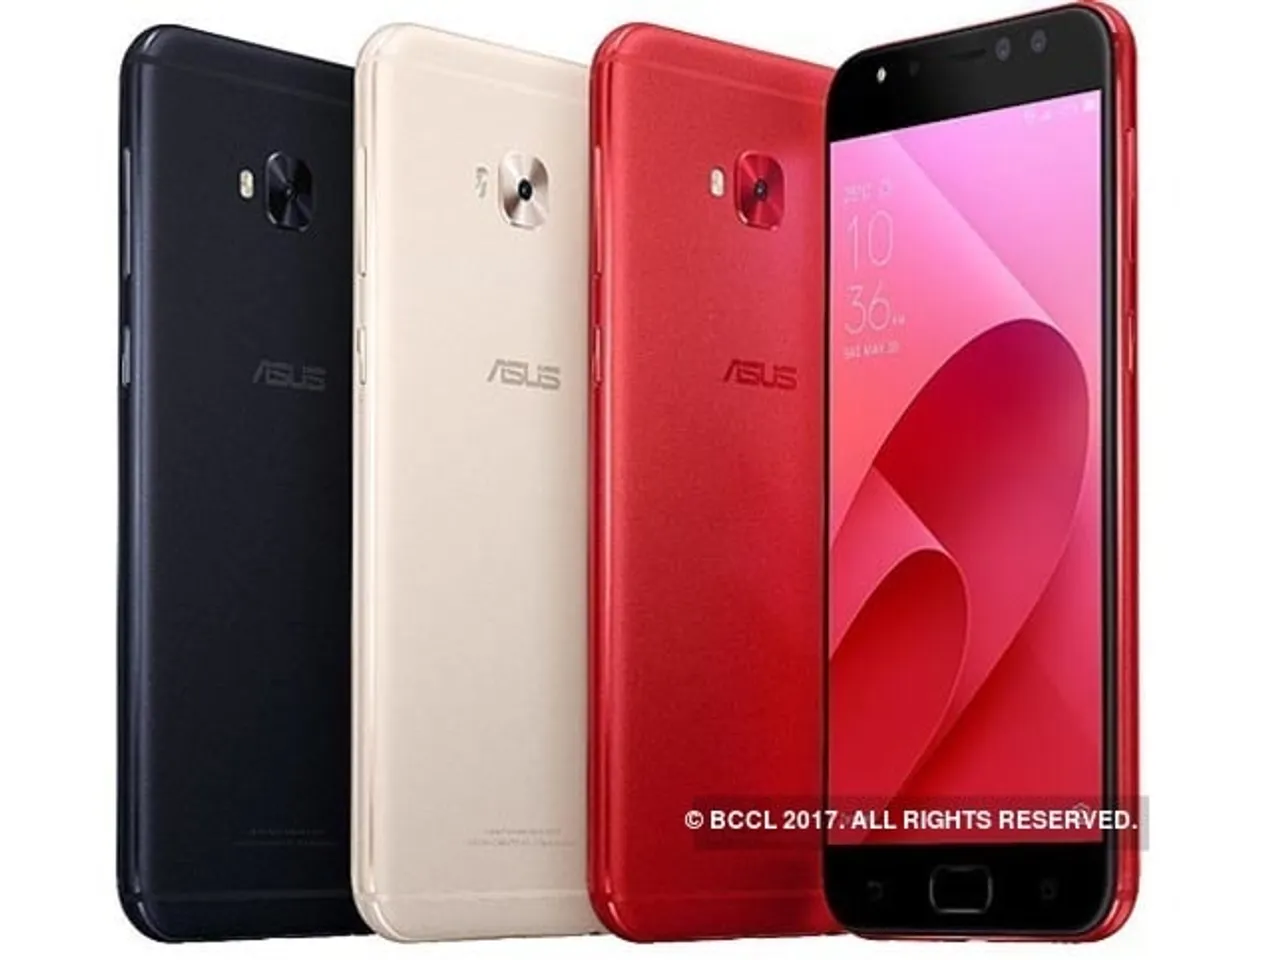 asus-launches-zenfone-4-selfie-smartphone-series-in-india-starting-rs-9999